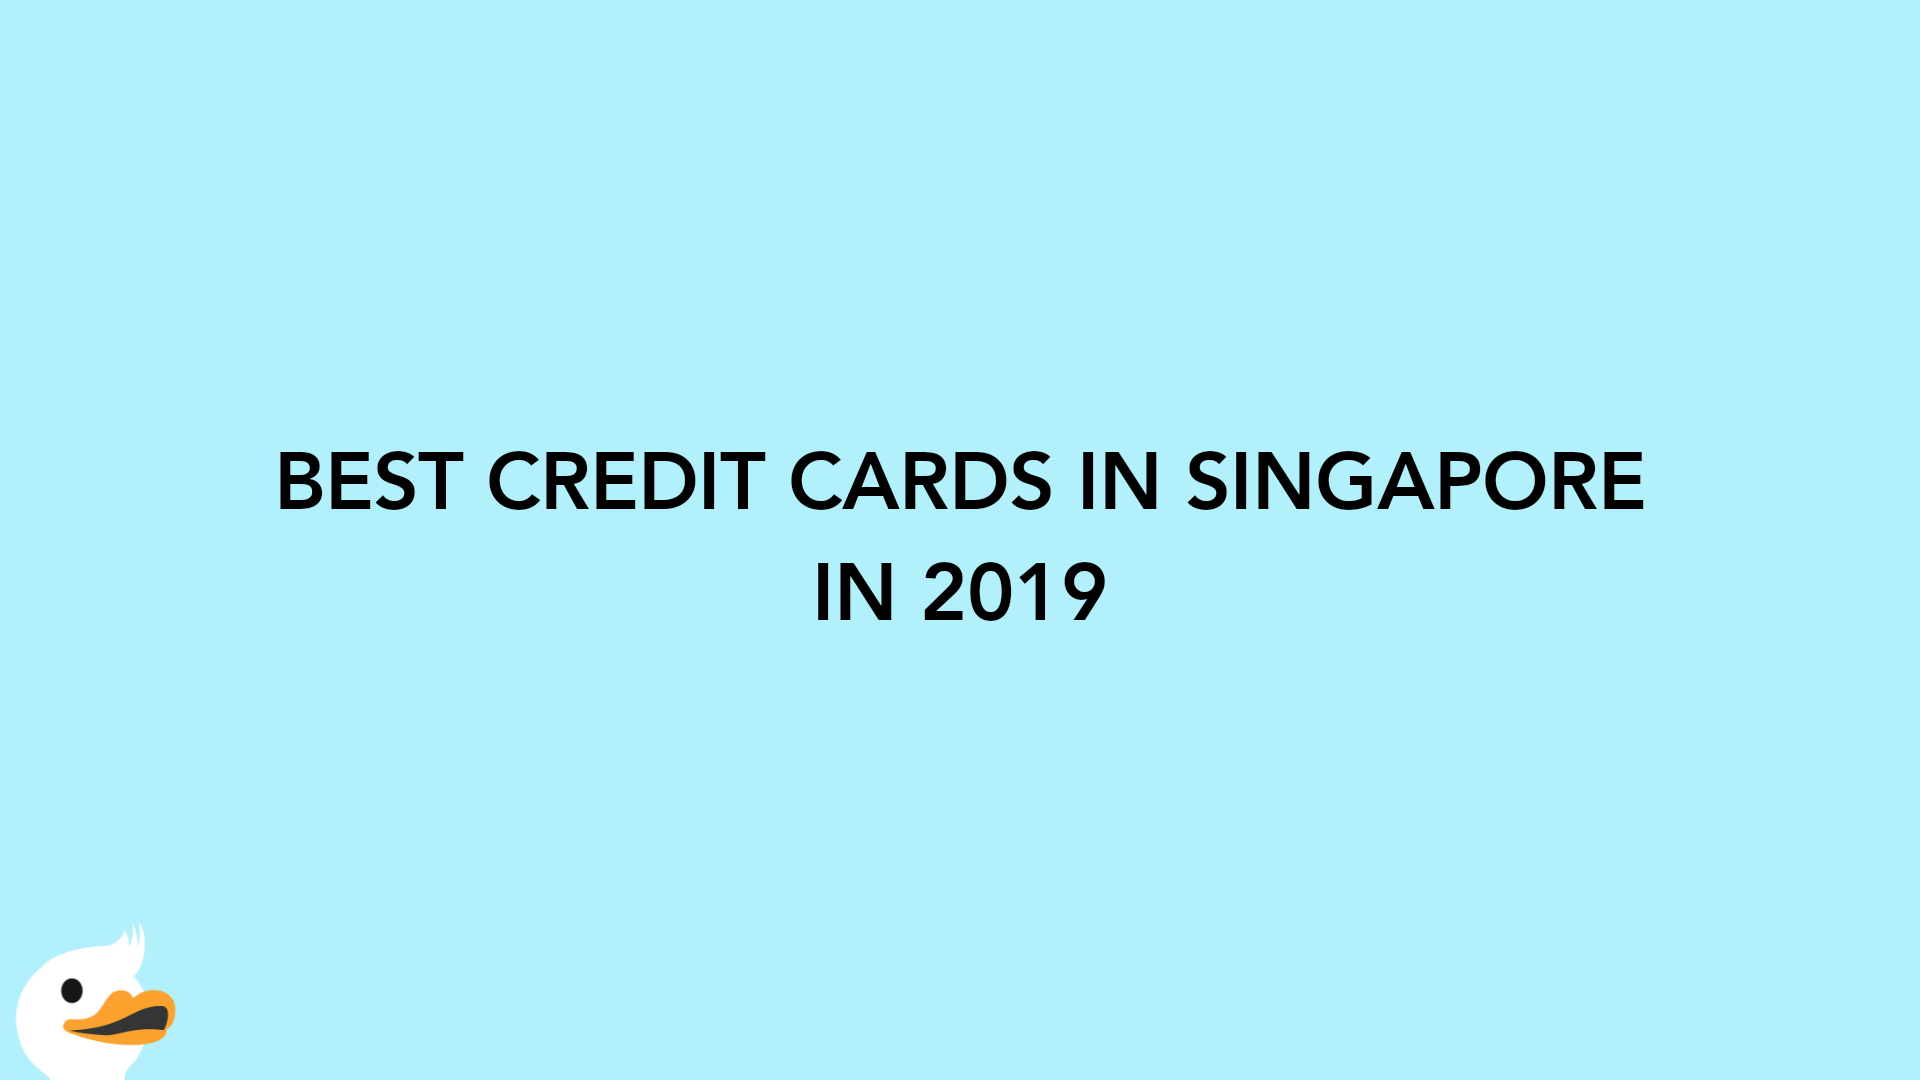 BEST CREDIT CARDS IN SINGAPORE IN 2019